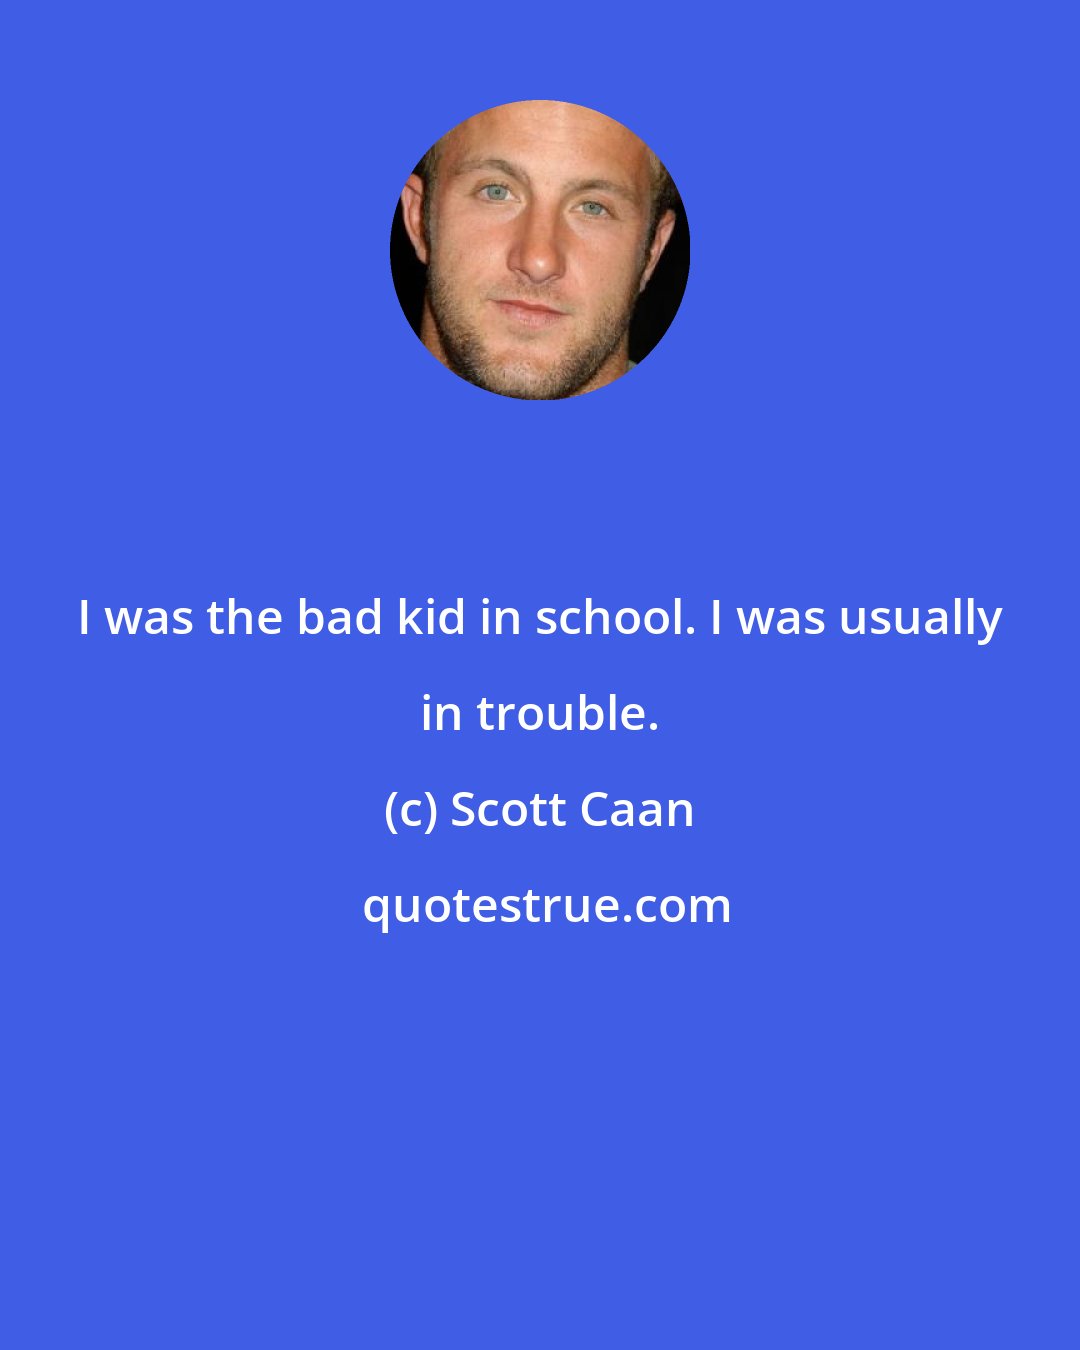 Scott Caan: I was the bad kid in school. I was usually in trouble.